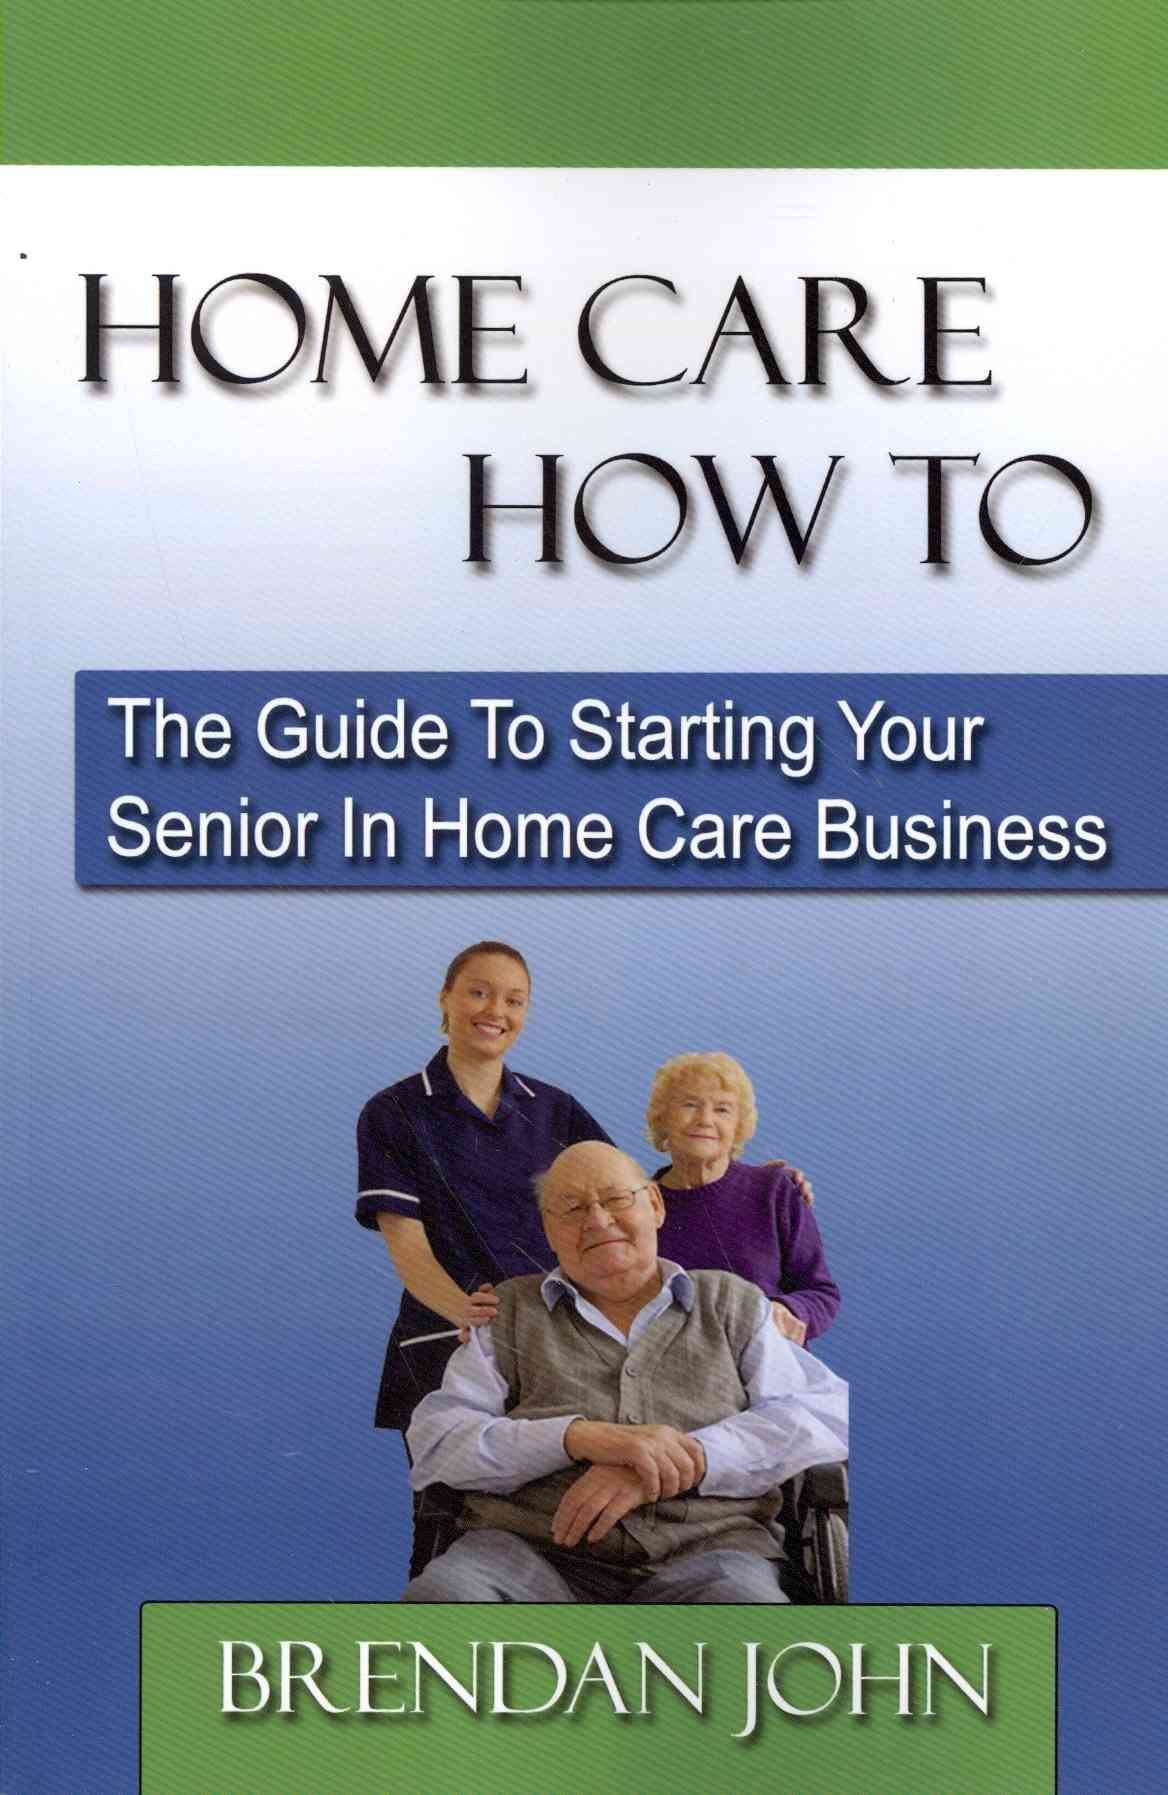 Home Care How to